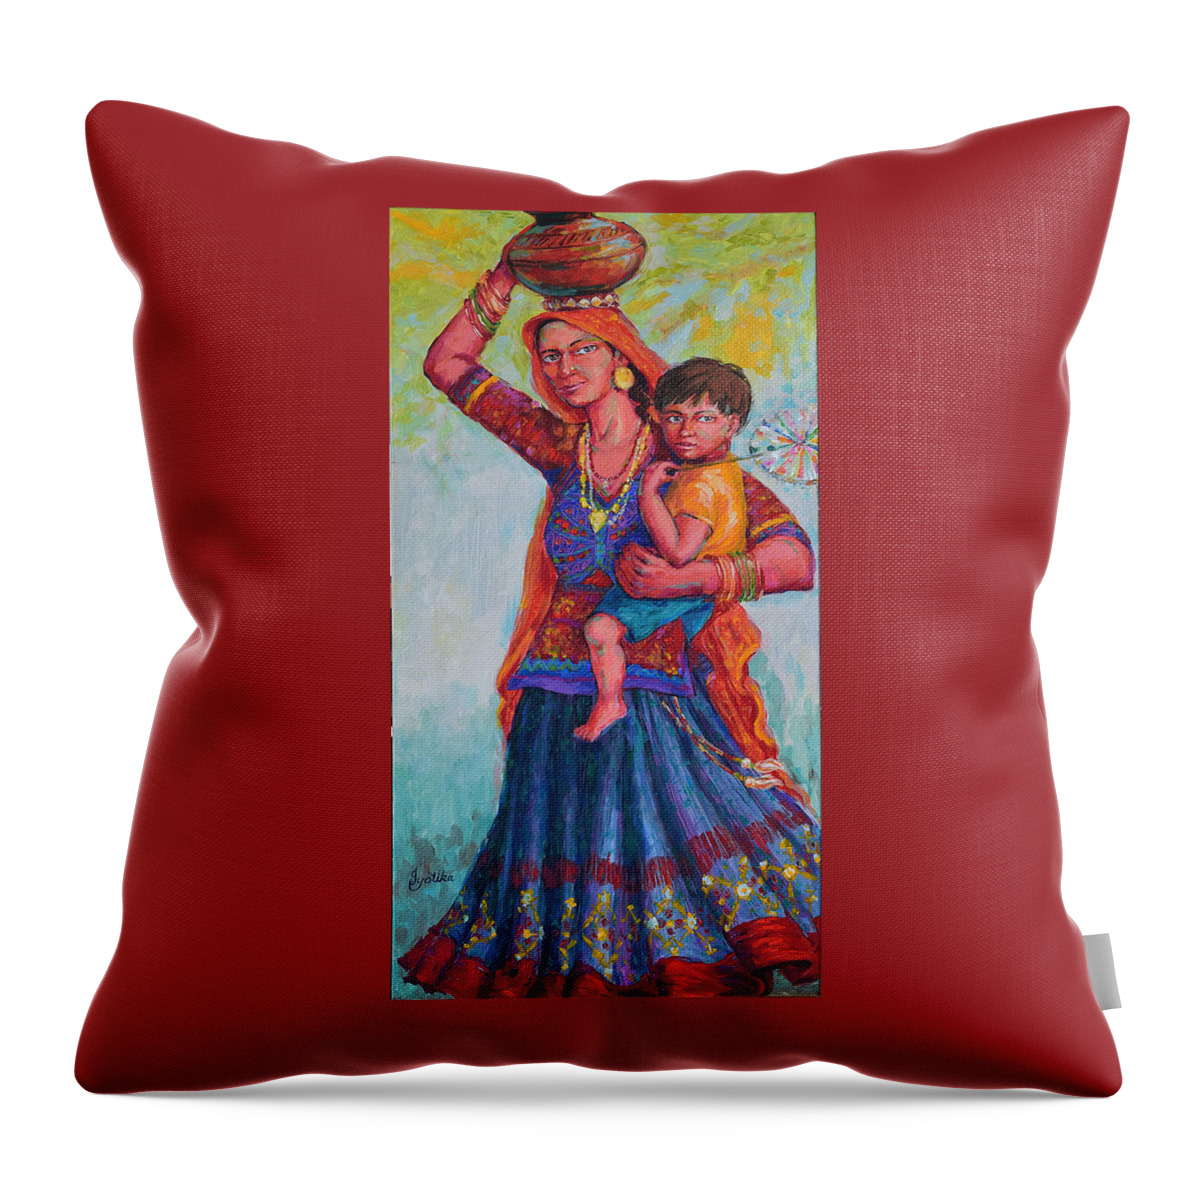 Tribal Woman Throw Pillow featuring the painting Fun Ride, Kutch by Jyotika Shroff